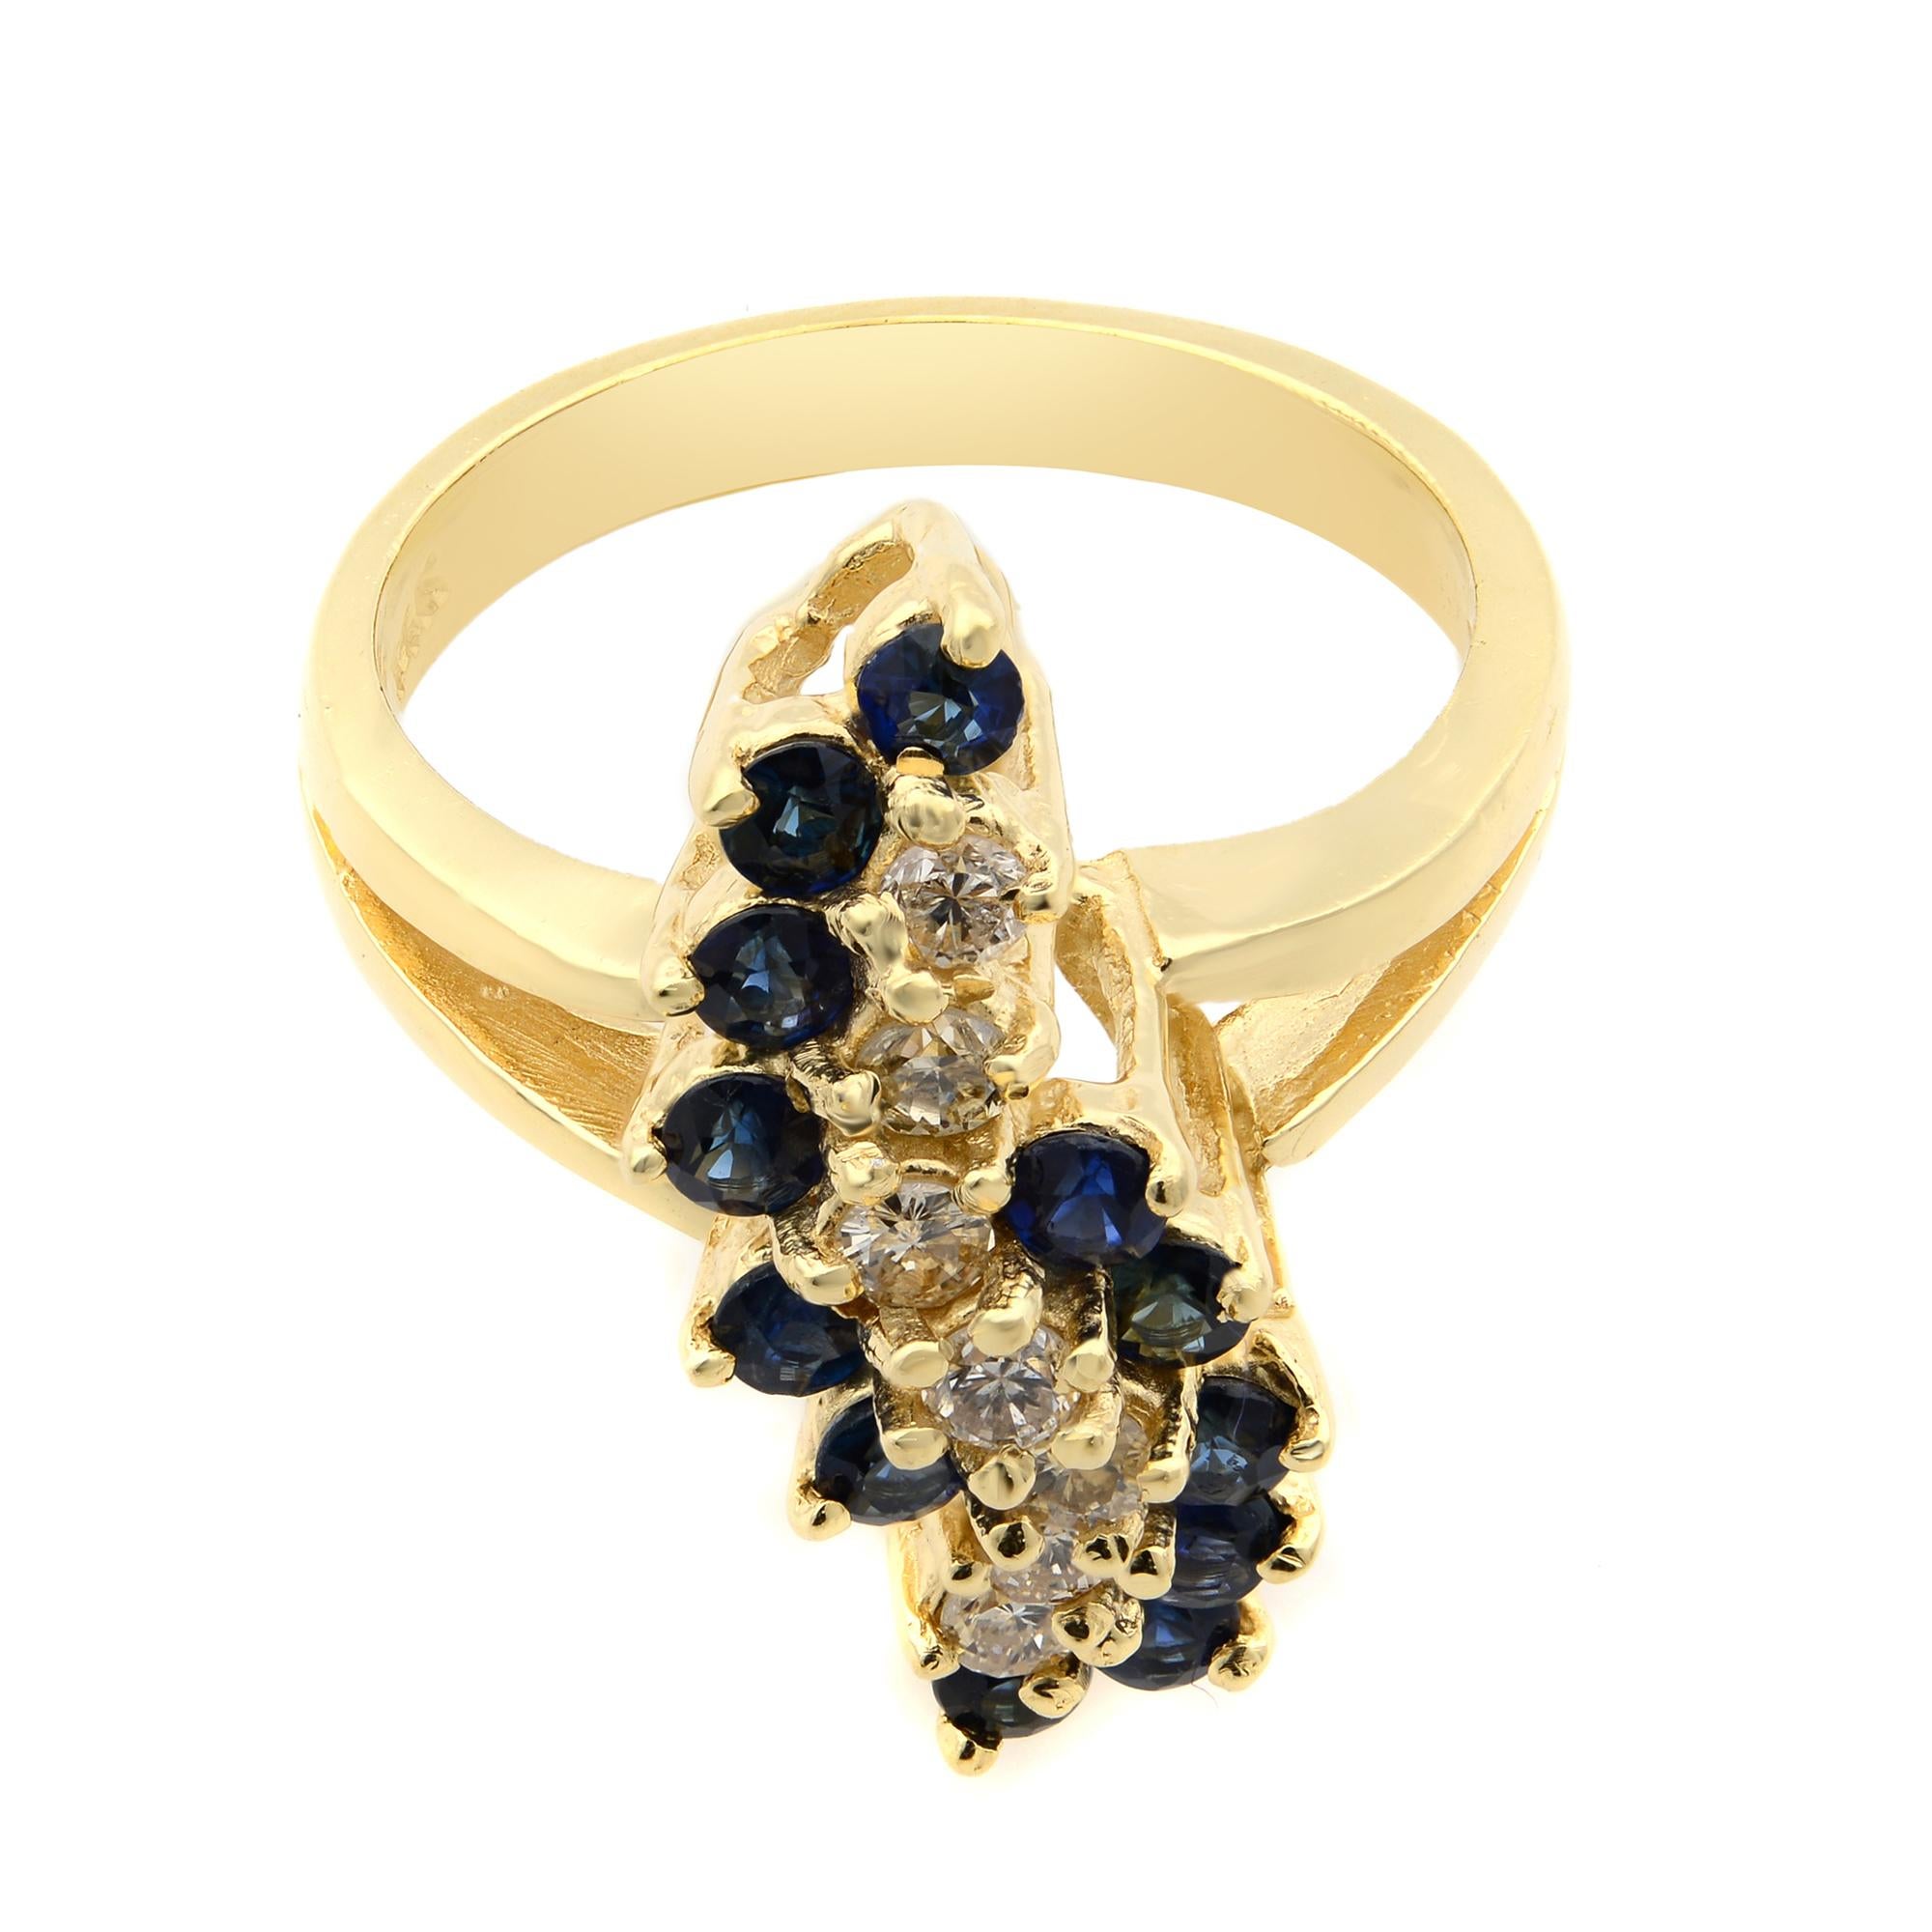 This stunning cocktail ring comes with a flashy statement look. A must have in your jewelry collection. Crafted in 14k yellow gold. It features a center row of round brilliant cut diamonds flanked with round cut blue sapphires on both sides in prong